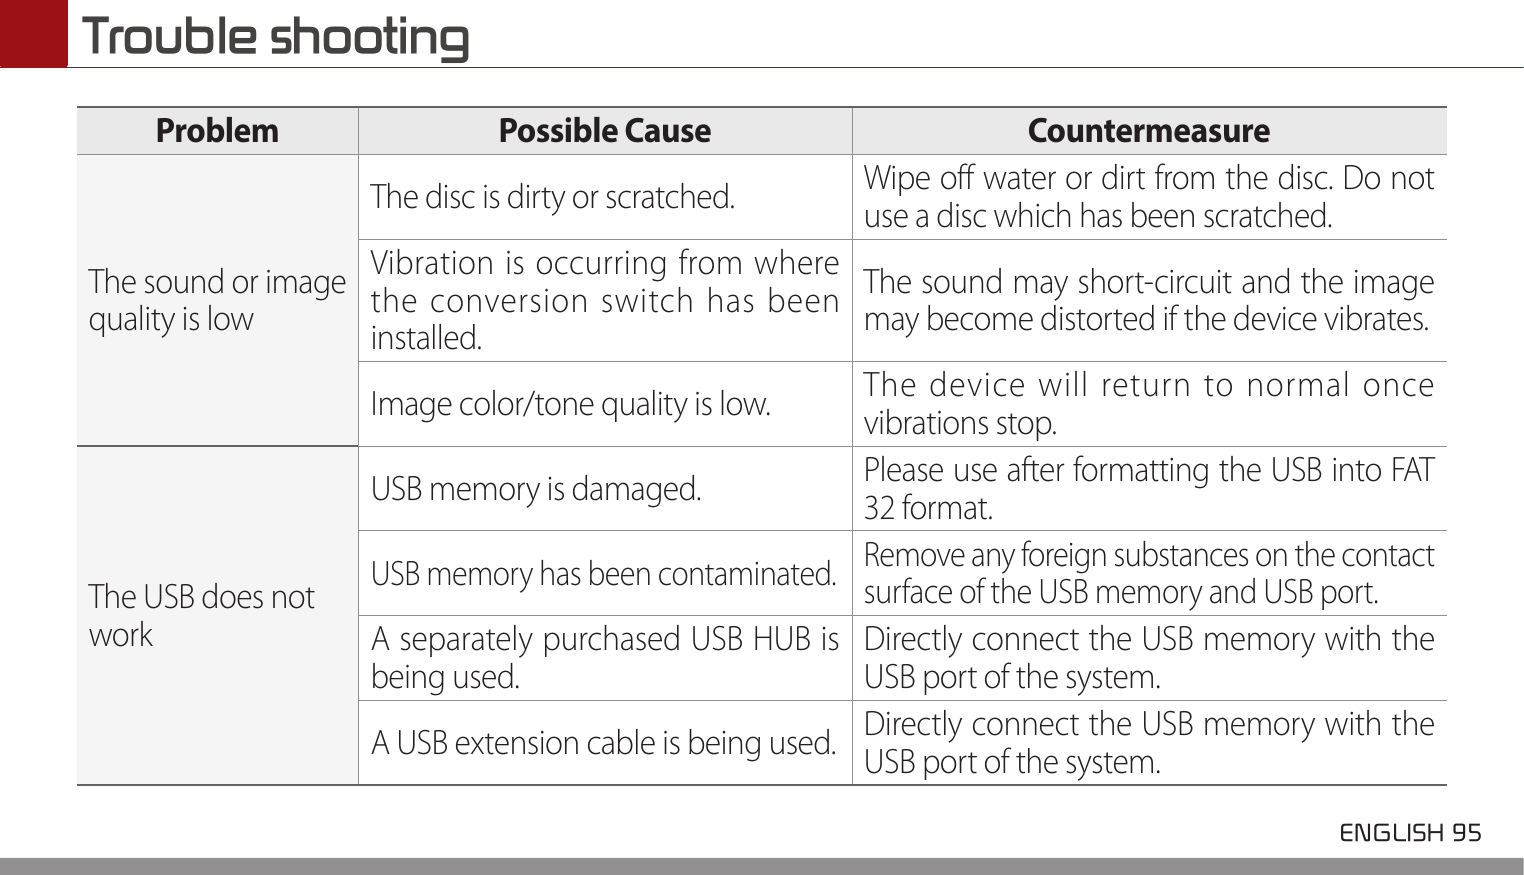  ENGLISH 95 Trouble shootingProblem  Possible Cause CountermeasureThe sound or image quality is lowThe disc is dirty or scratched. Wipe off water or dirt from the disc. Do not use a disc which has been scratched.Vibration is occurring from where the conversion switch has been installed.The sound may short-circuit and the image may become distorted if the device vibrates.Image color/tone quality is low. The device will return to normal once vibrations stop.The USB does not workUSB memory is damaged. Please use after formatting the USB into FAT 32 format.USB memory has been contaminated.Remove any foreign substances on the contact surface of the USB memory and USB port.A separately purchased USB HUB is being used.Directly connect the USB memory with the USB port of the system.A USB extension cable is being used. Directly connect the USB memory with the USB port of the system.